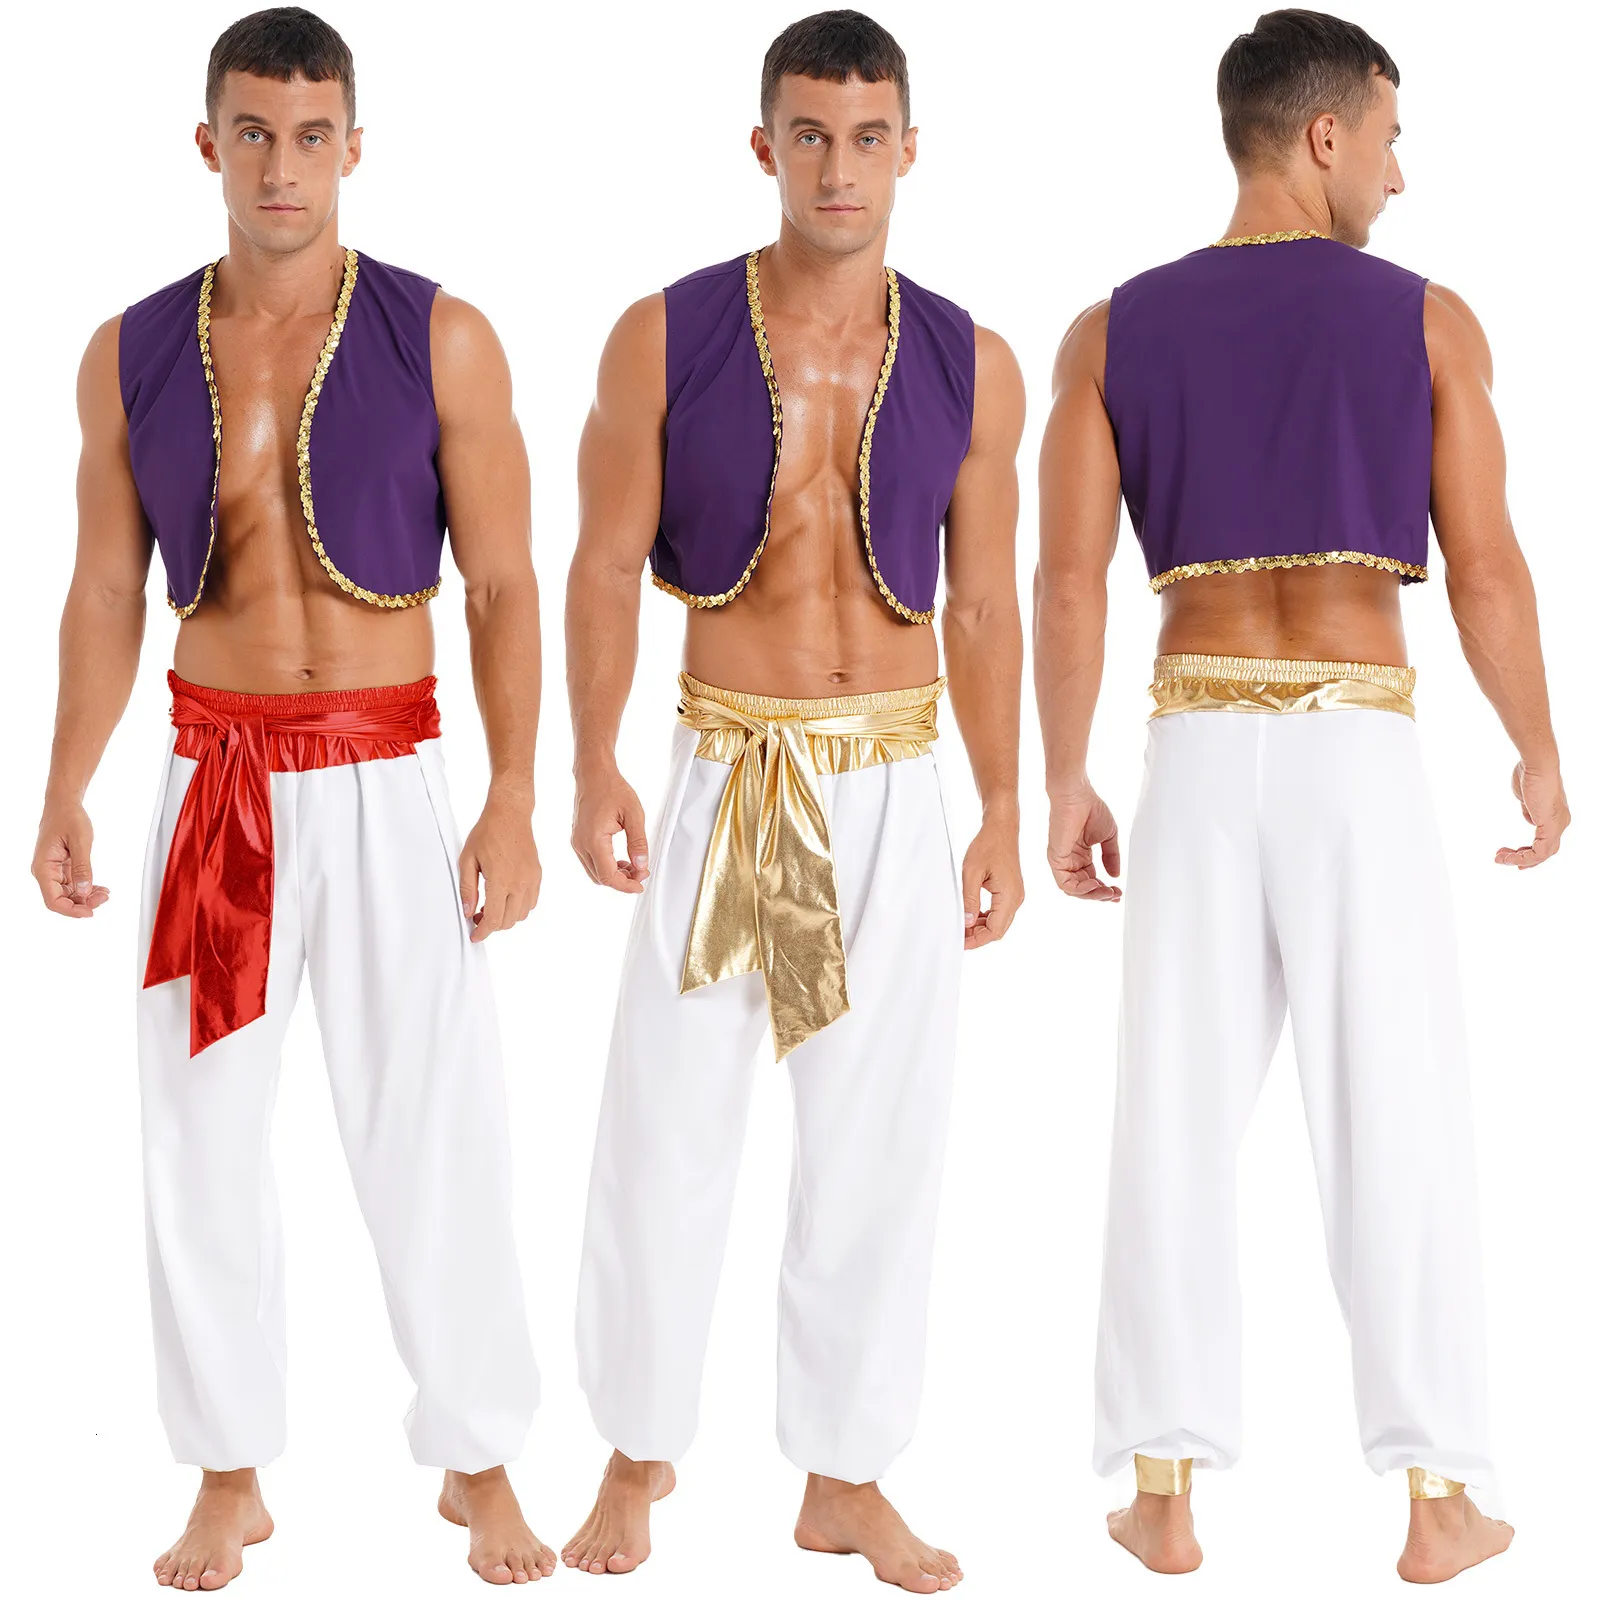 Theme Costume Mens Halloween Costume Mythical Prince Aladin Carnival Cosplay Party Outfit Sequin Trim Waistcoat with Belted Pants 230410